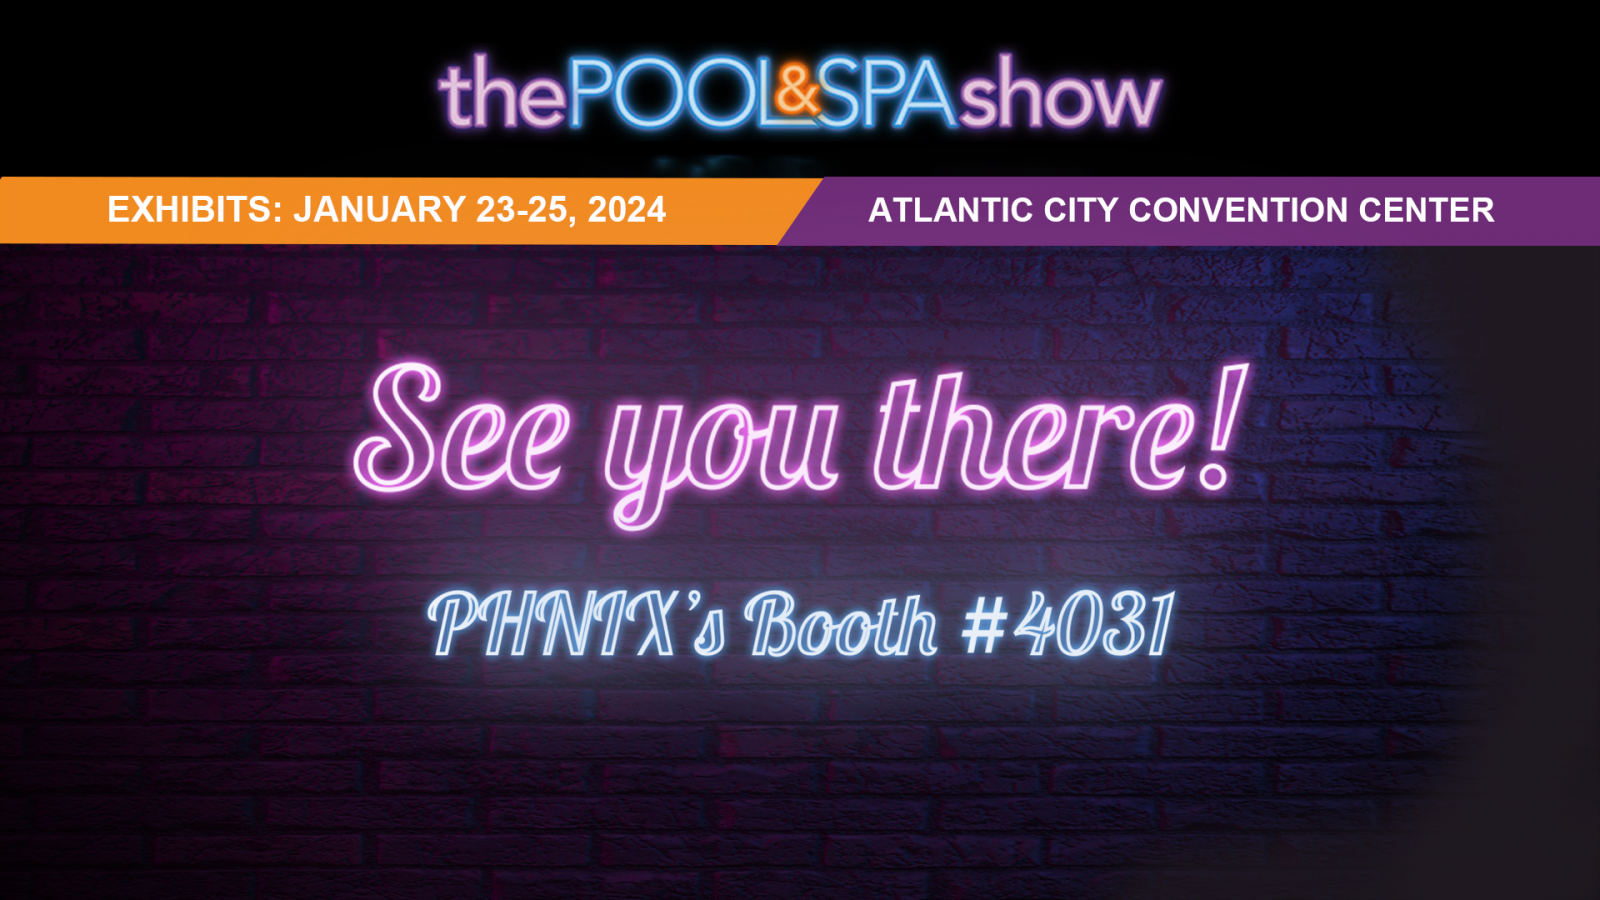 The 2024 Pool and Spa Show PHNIX